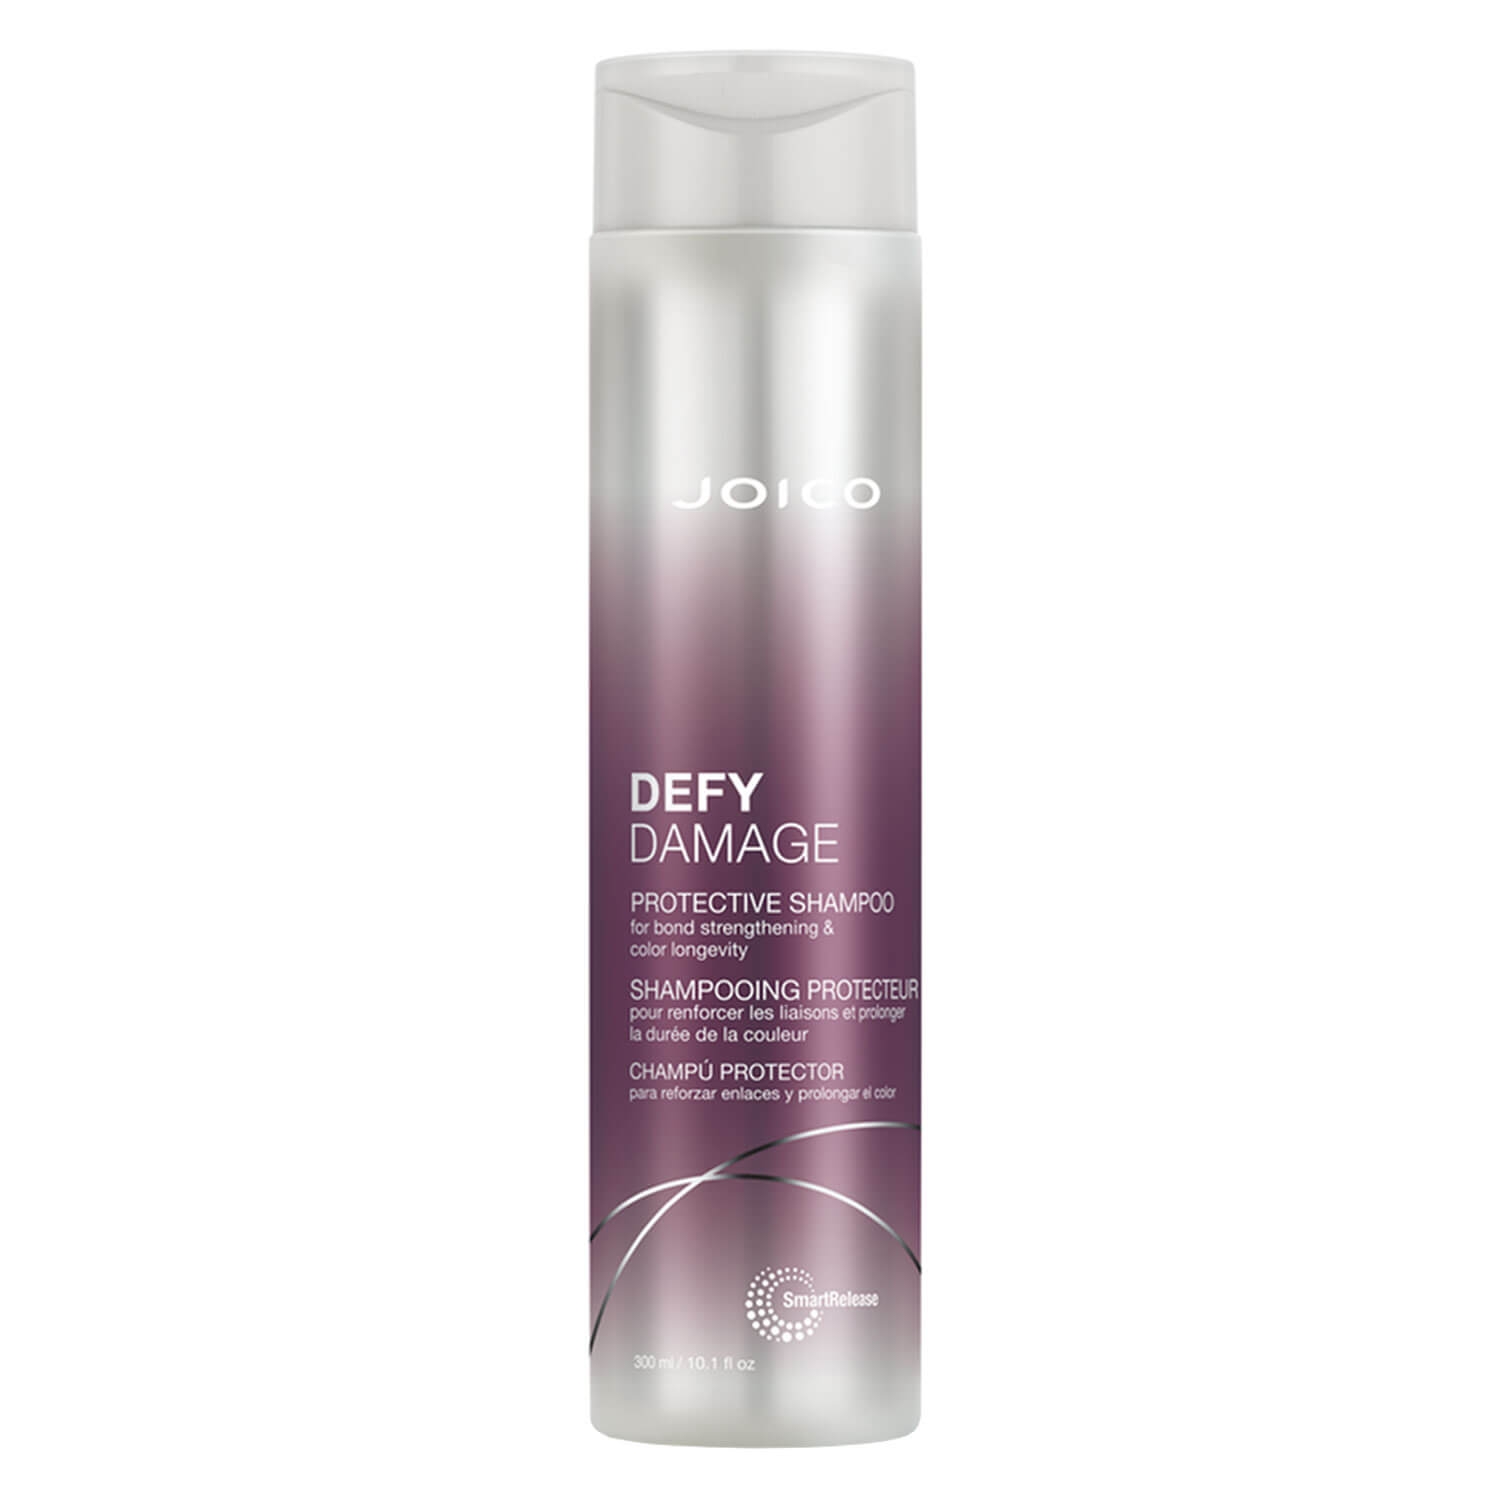 Product image from Defy Damage - Protective Shampoo